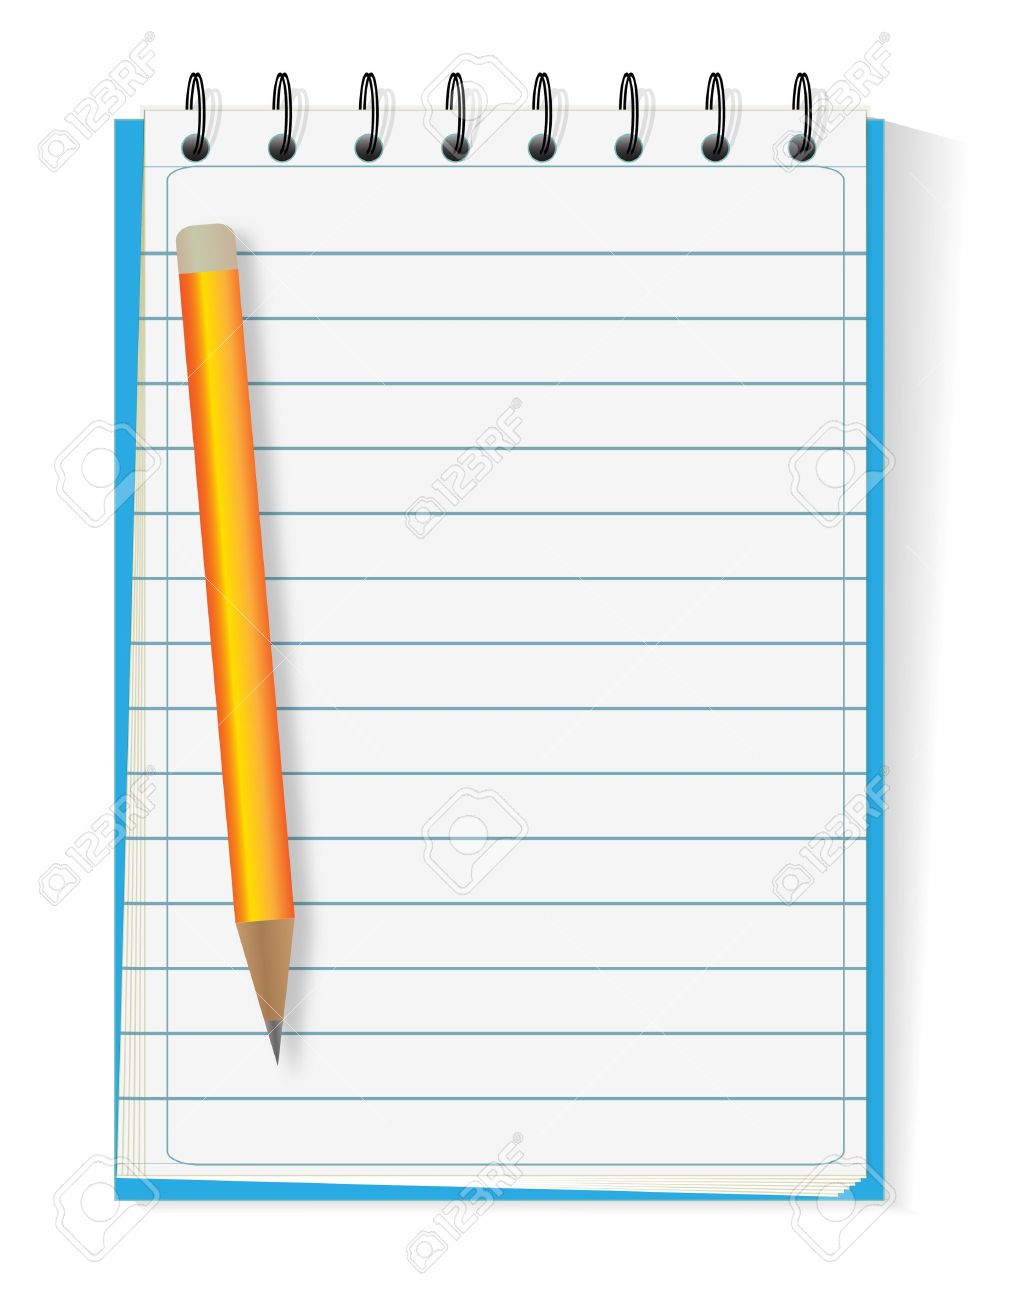 Clipart notebook and pen.